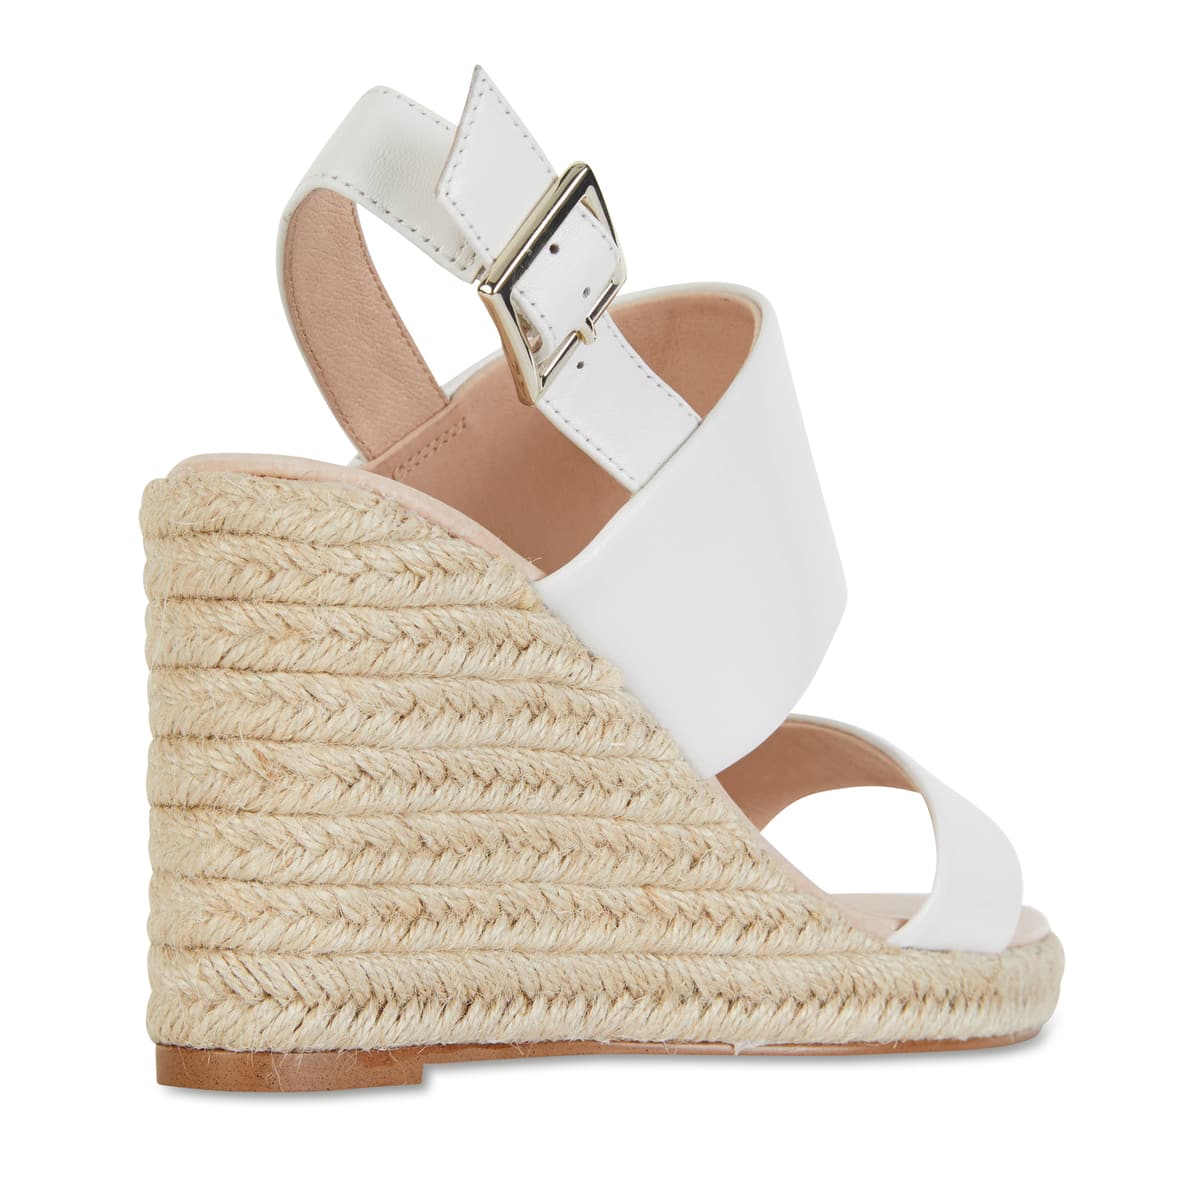 Dice Espadrille in White Leather